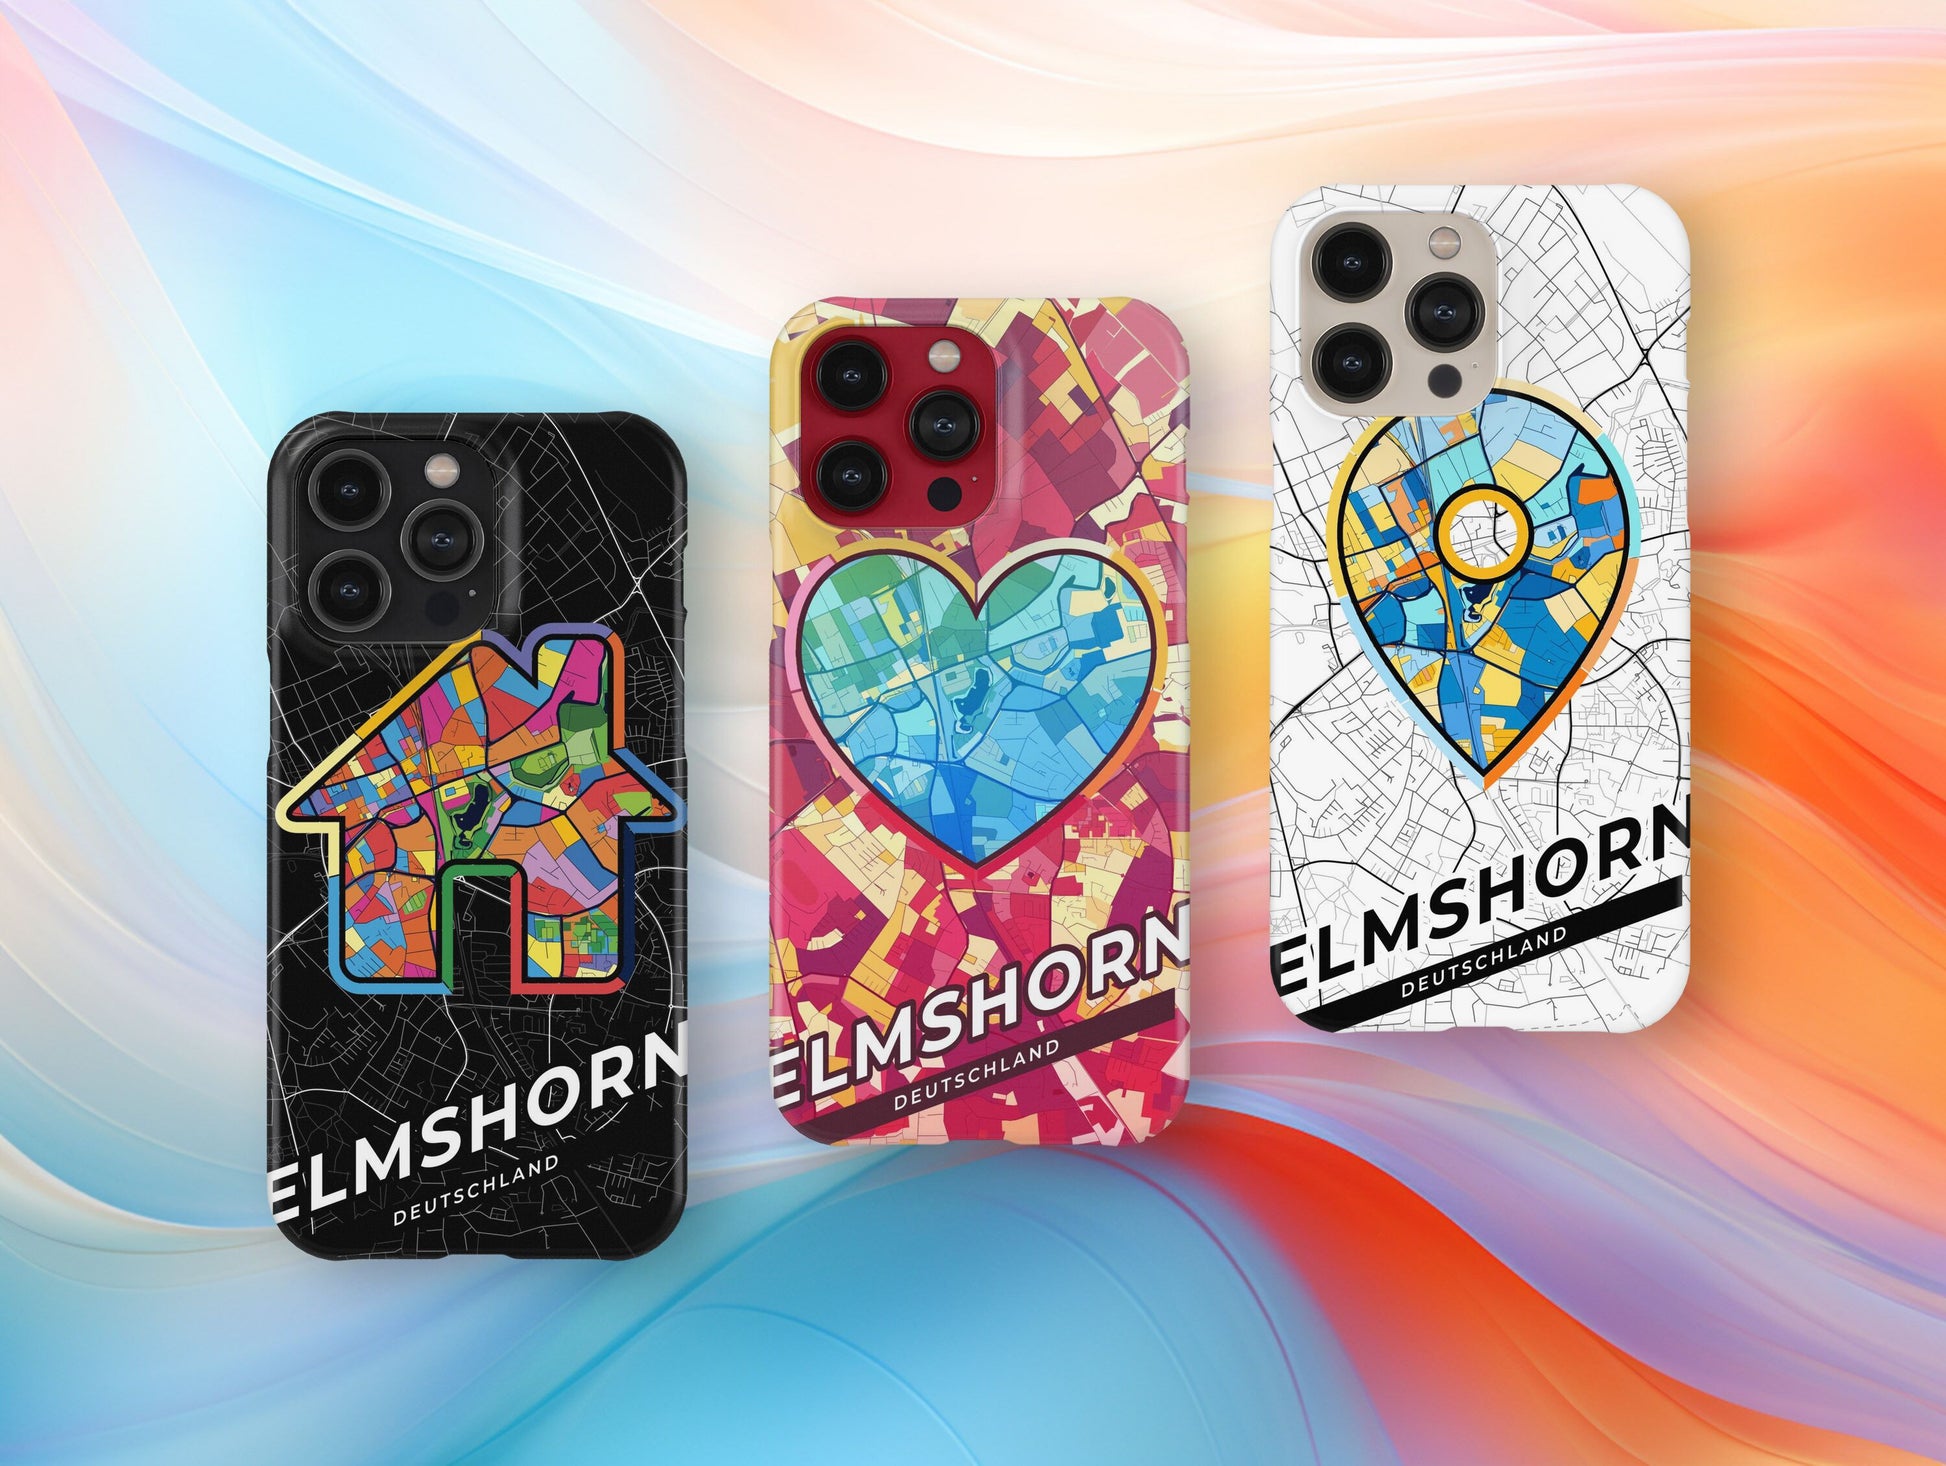 Elmshorn Deutschland slim phone case with colorful icon. Birthday, wedding or housewarming gift. Couple match cases.